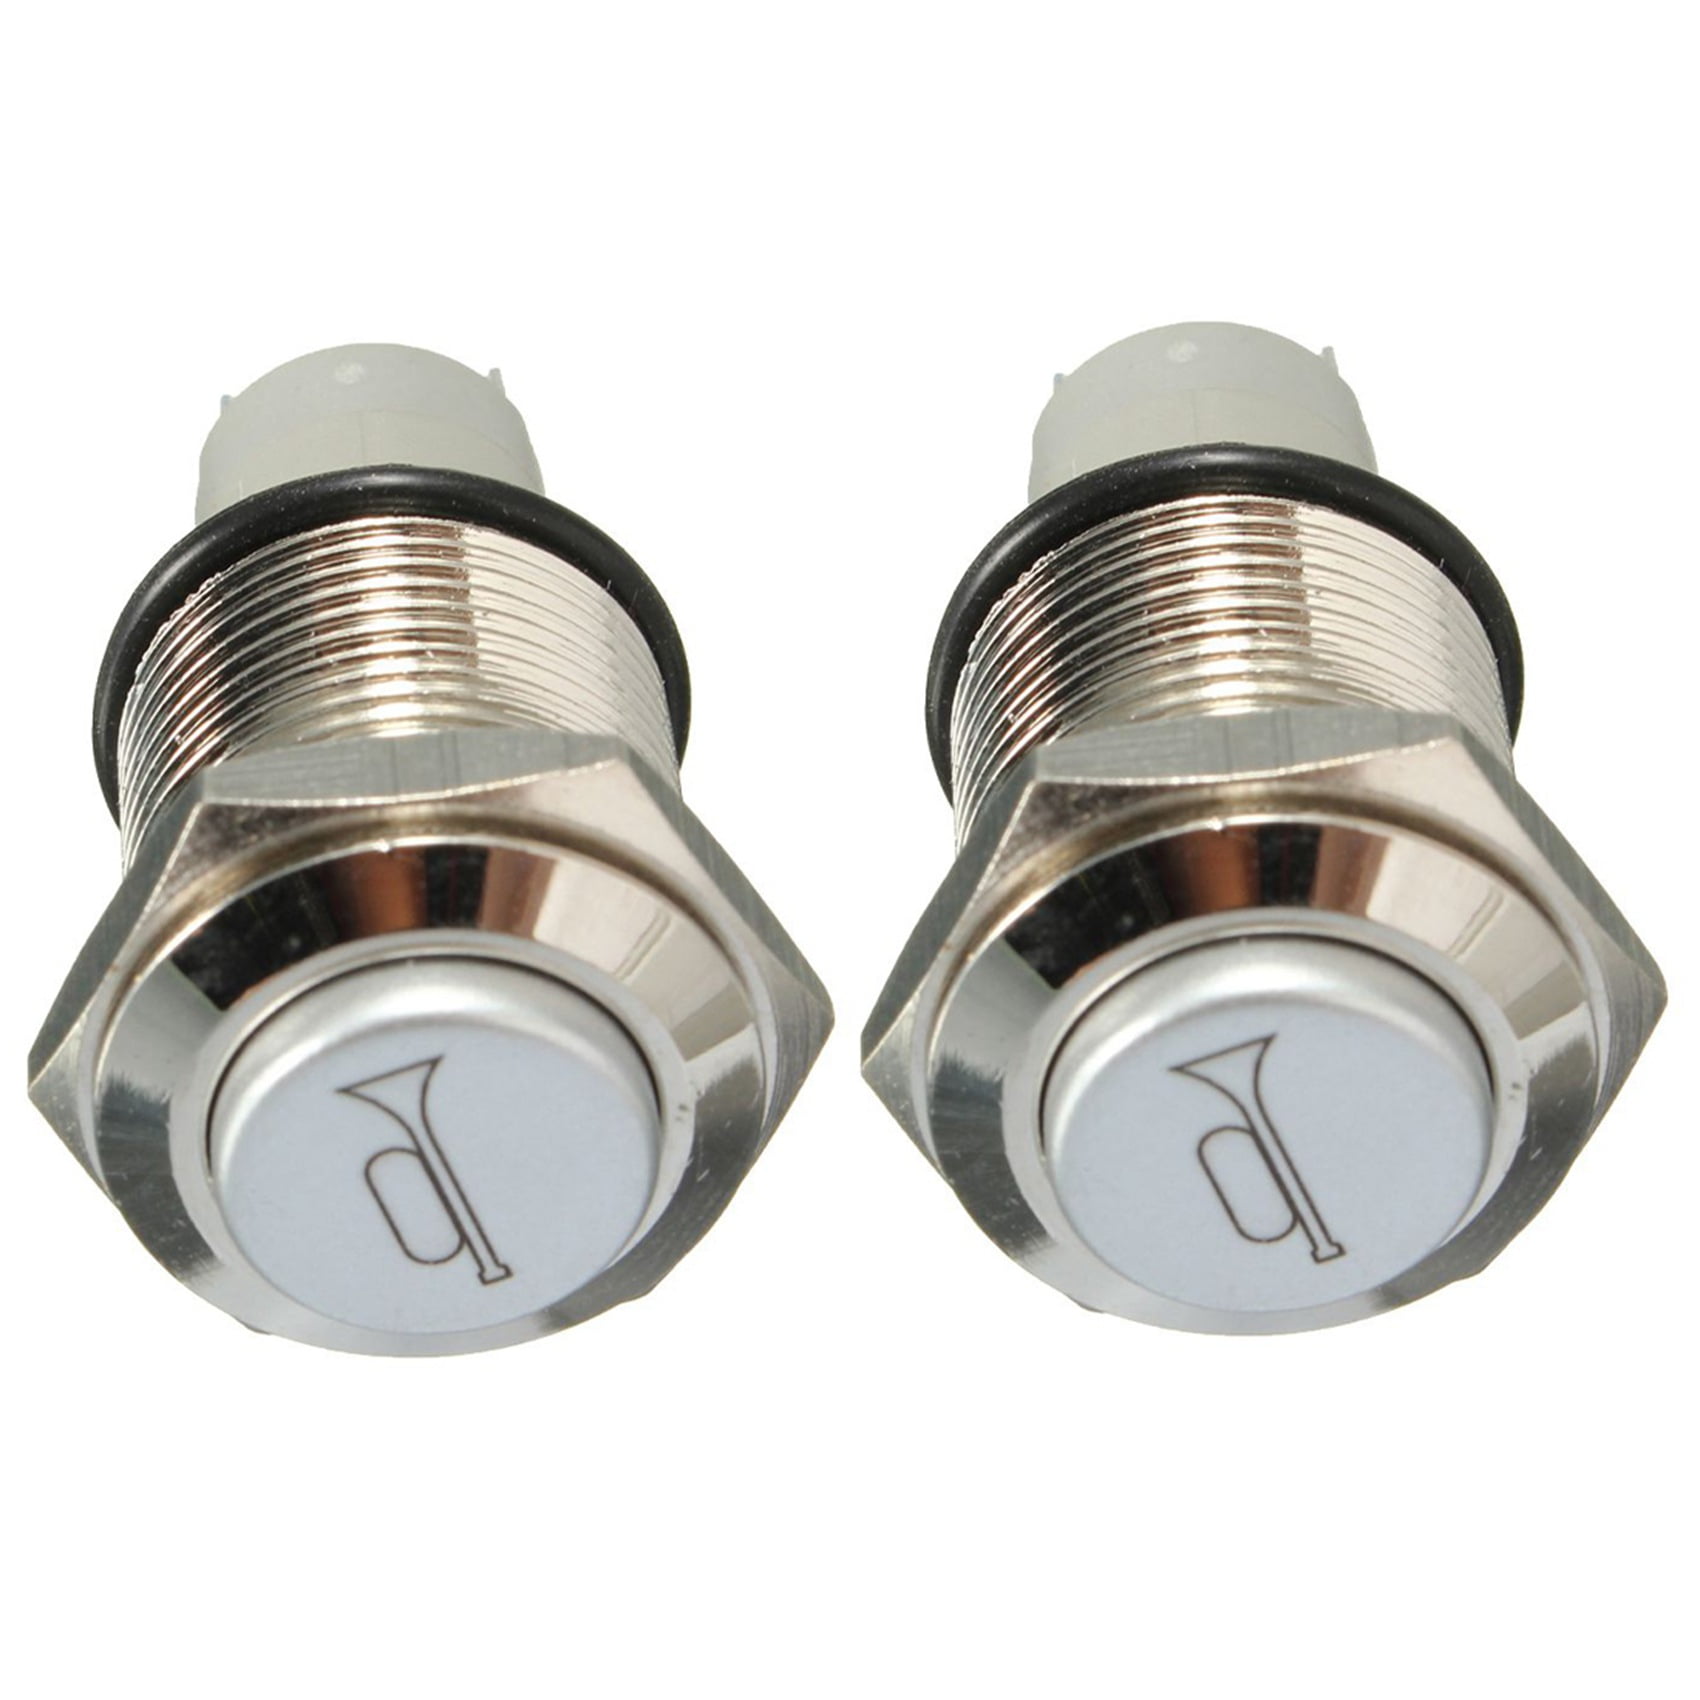 2X Durable 12V Red LED 19mm Momentary Car Horn Push Button Toggle Light Switch 